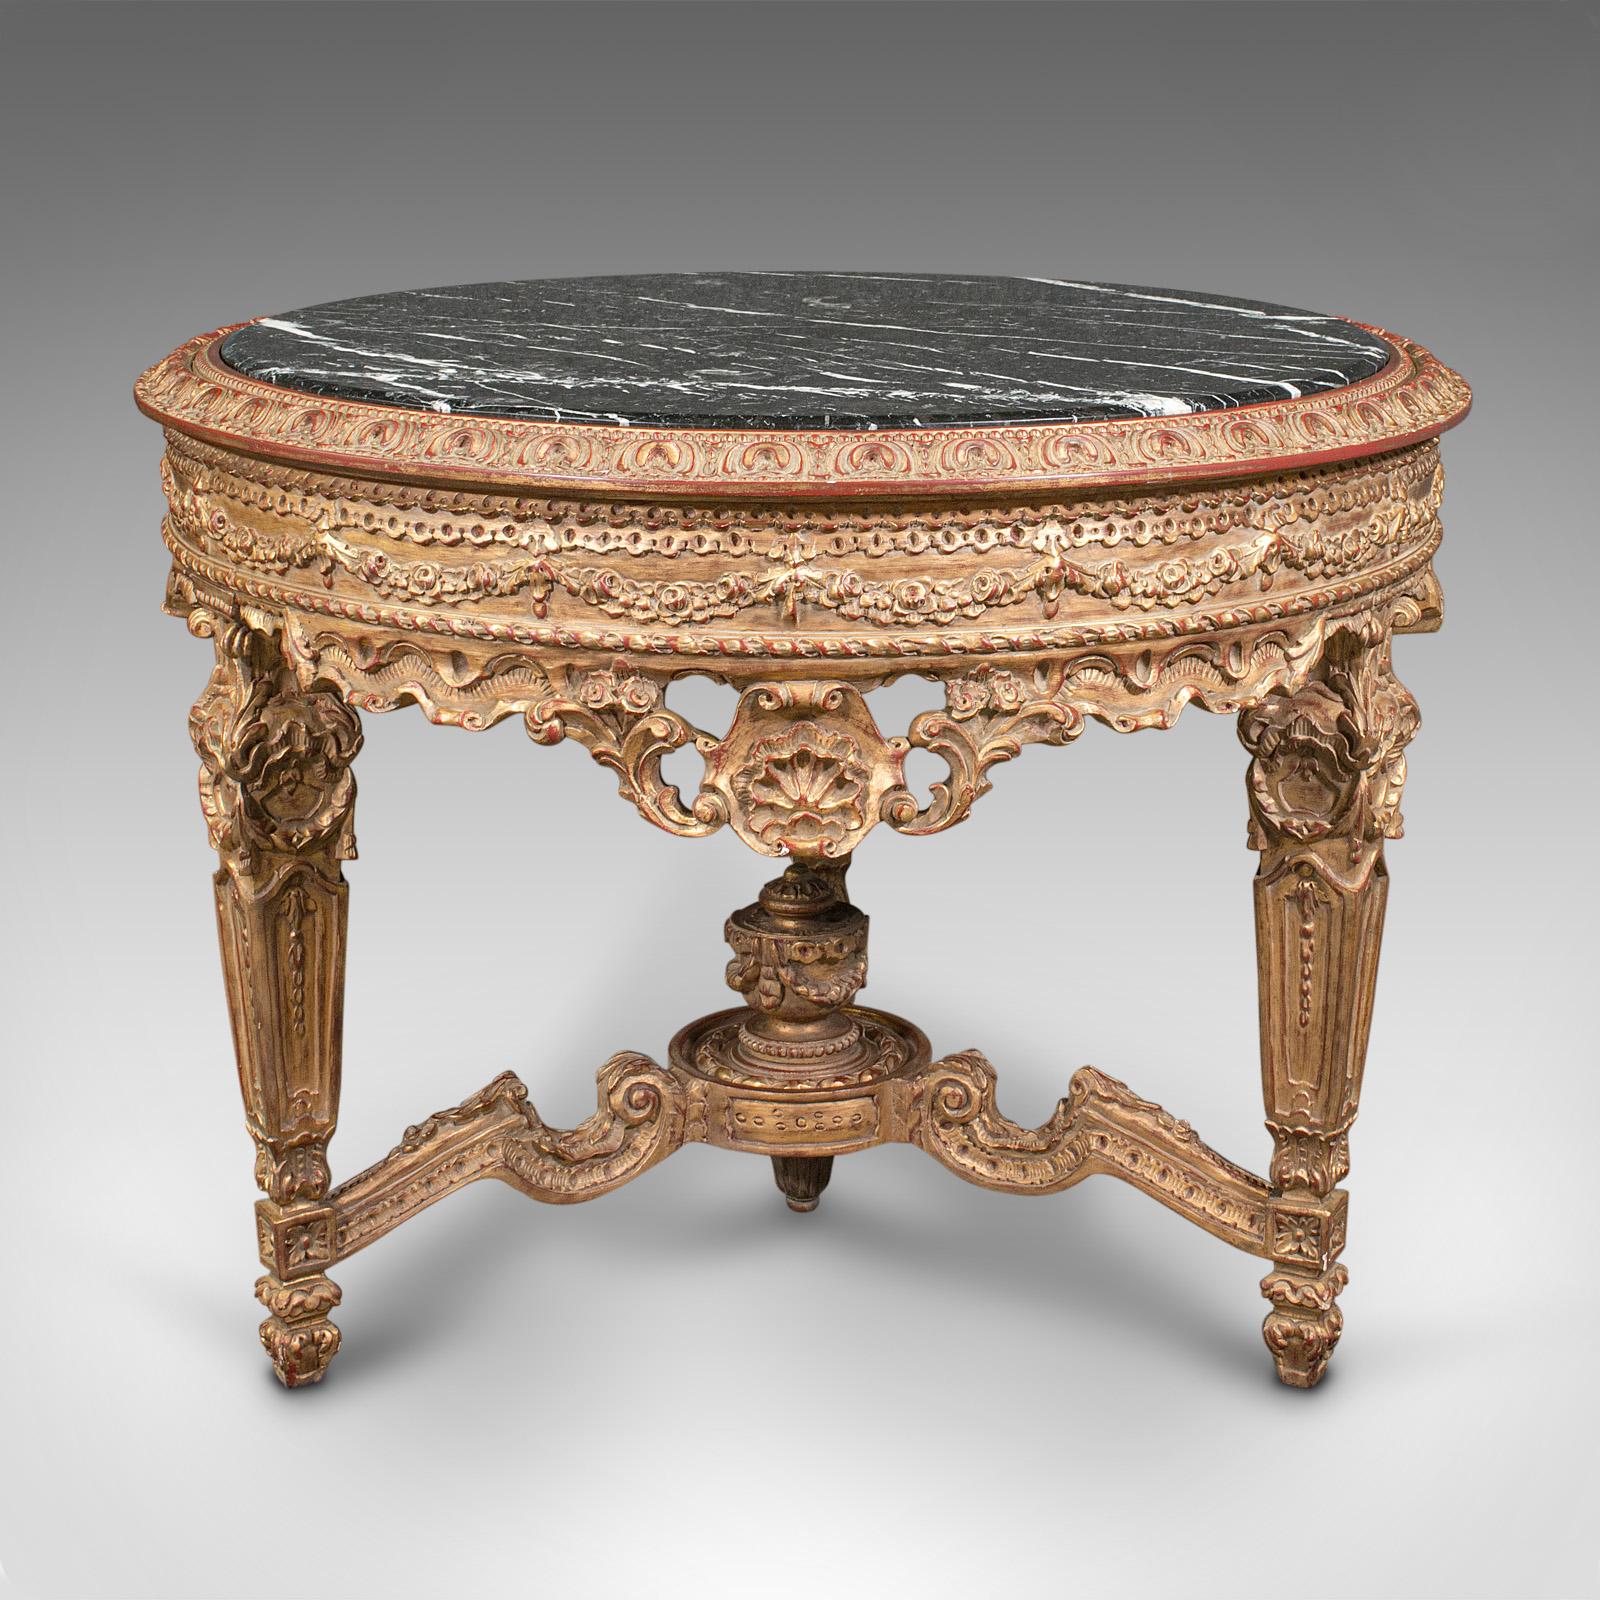 This is a grand vintage circular table. A Continental, giltwood and marble centrepiece table in Rococo revival taste, dating to the late 20th century, circa 1980.

An alluring statement piece for lovers of the flamboyant
Displays a desirable aged